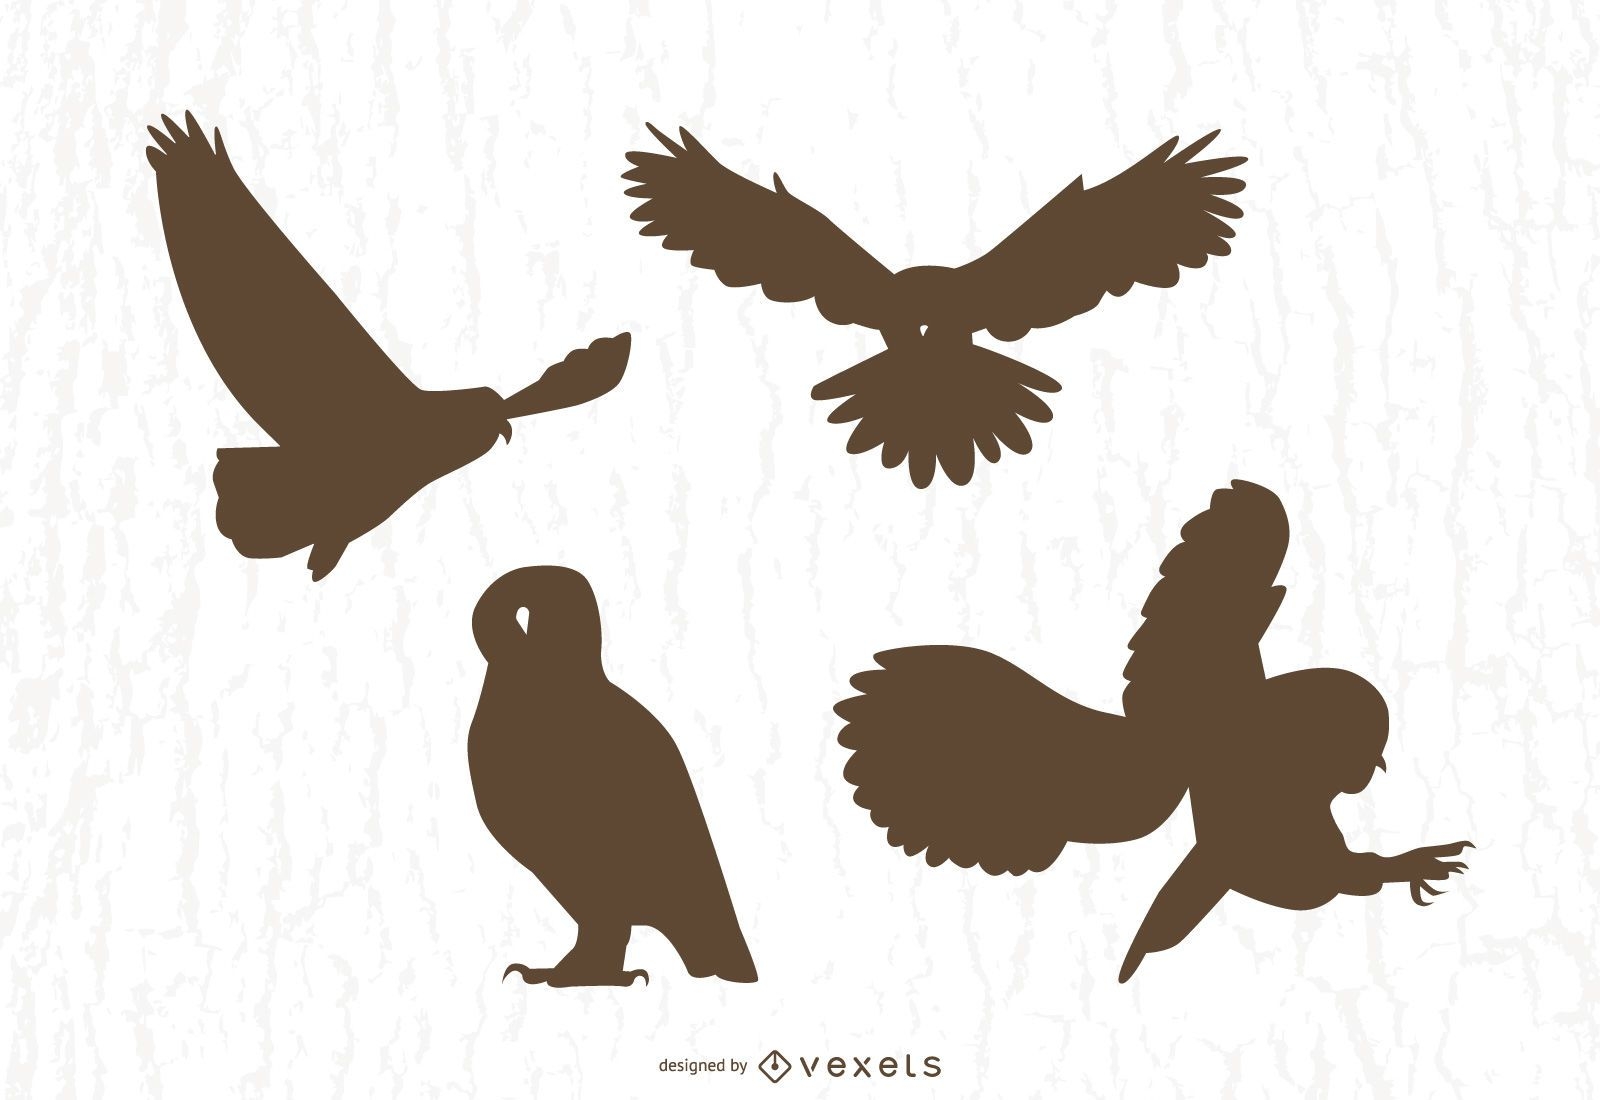 Owl silhouettes vector set